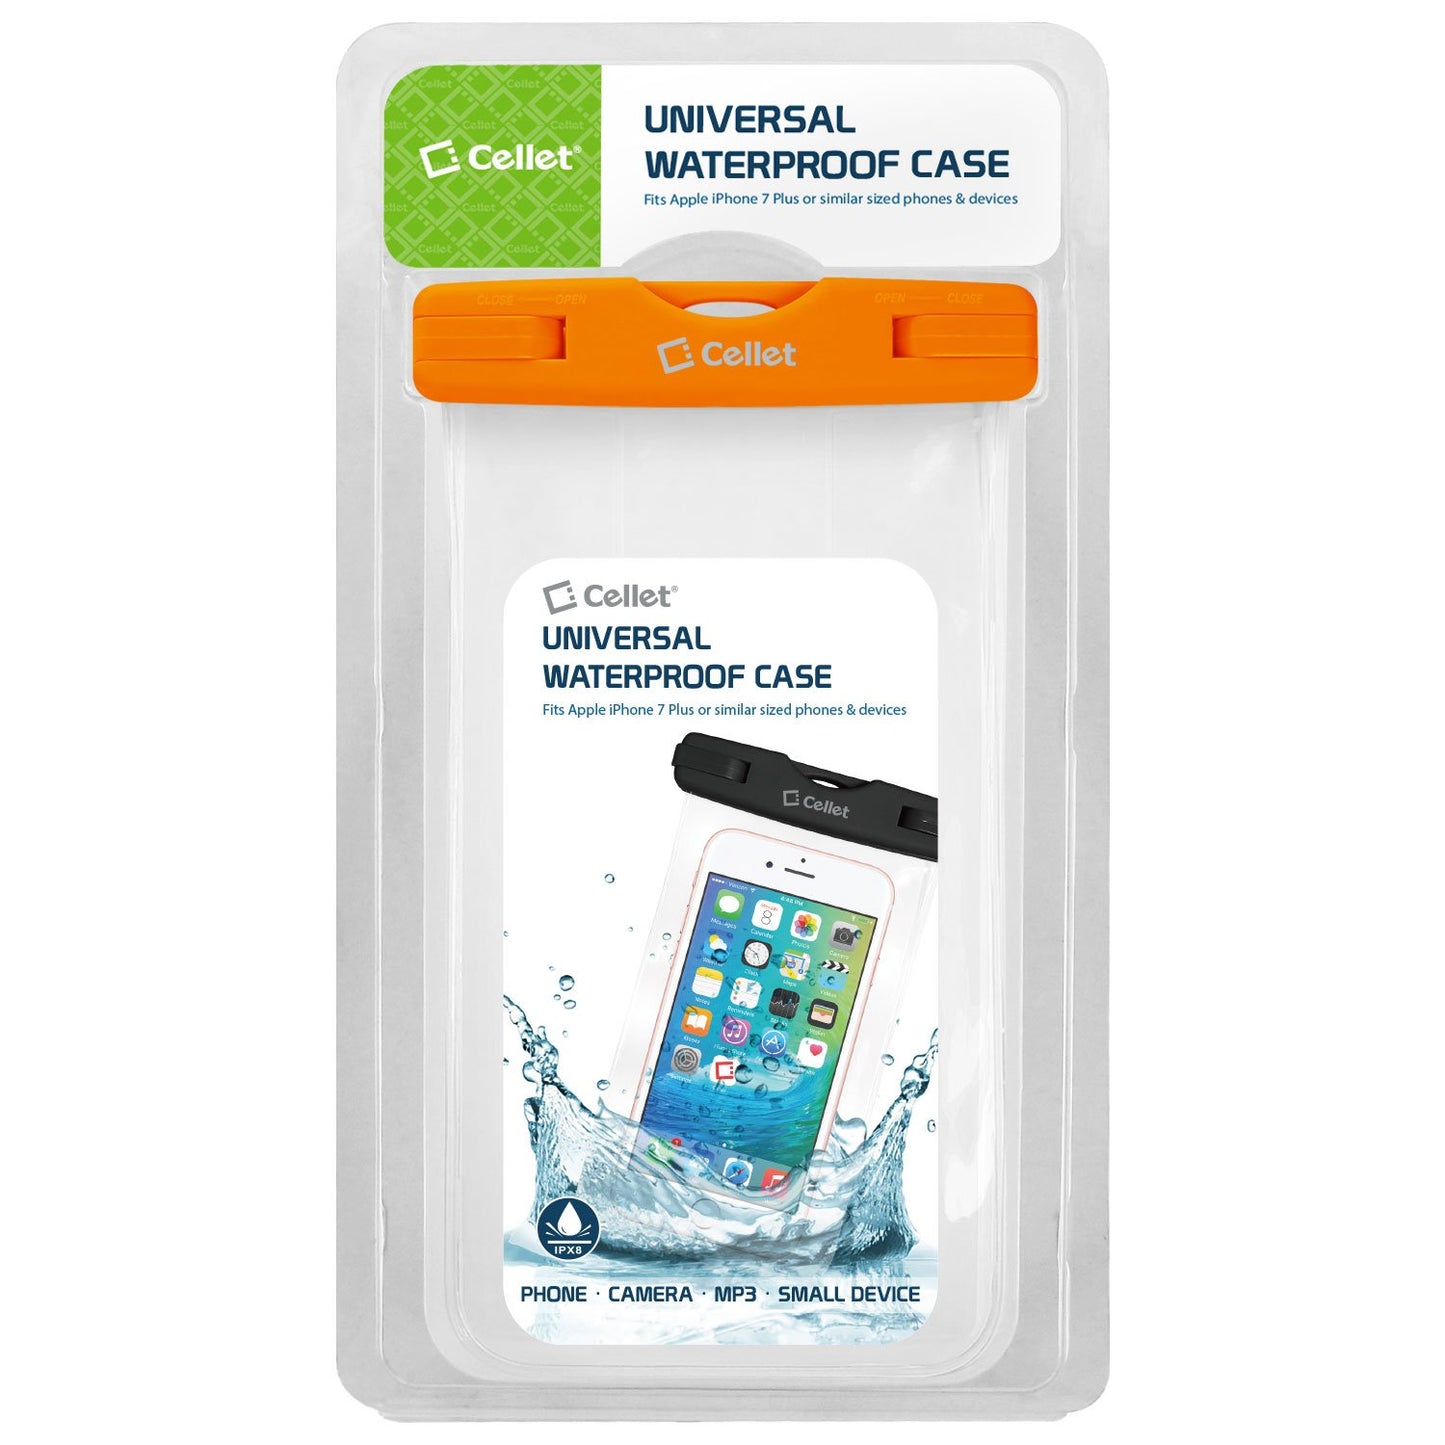 WATER1OR - Cellet Universal IPX8 Waterproof Case for Apple iPhone 7 Plus, Digital Cameras, MP3 Players and More - Orange